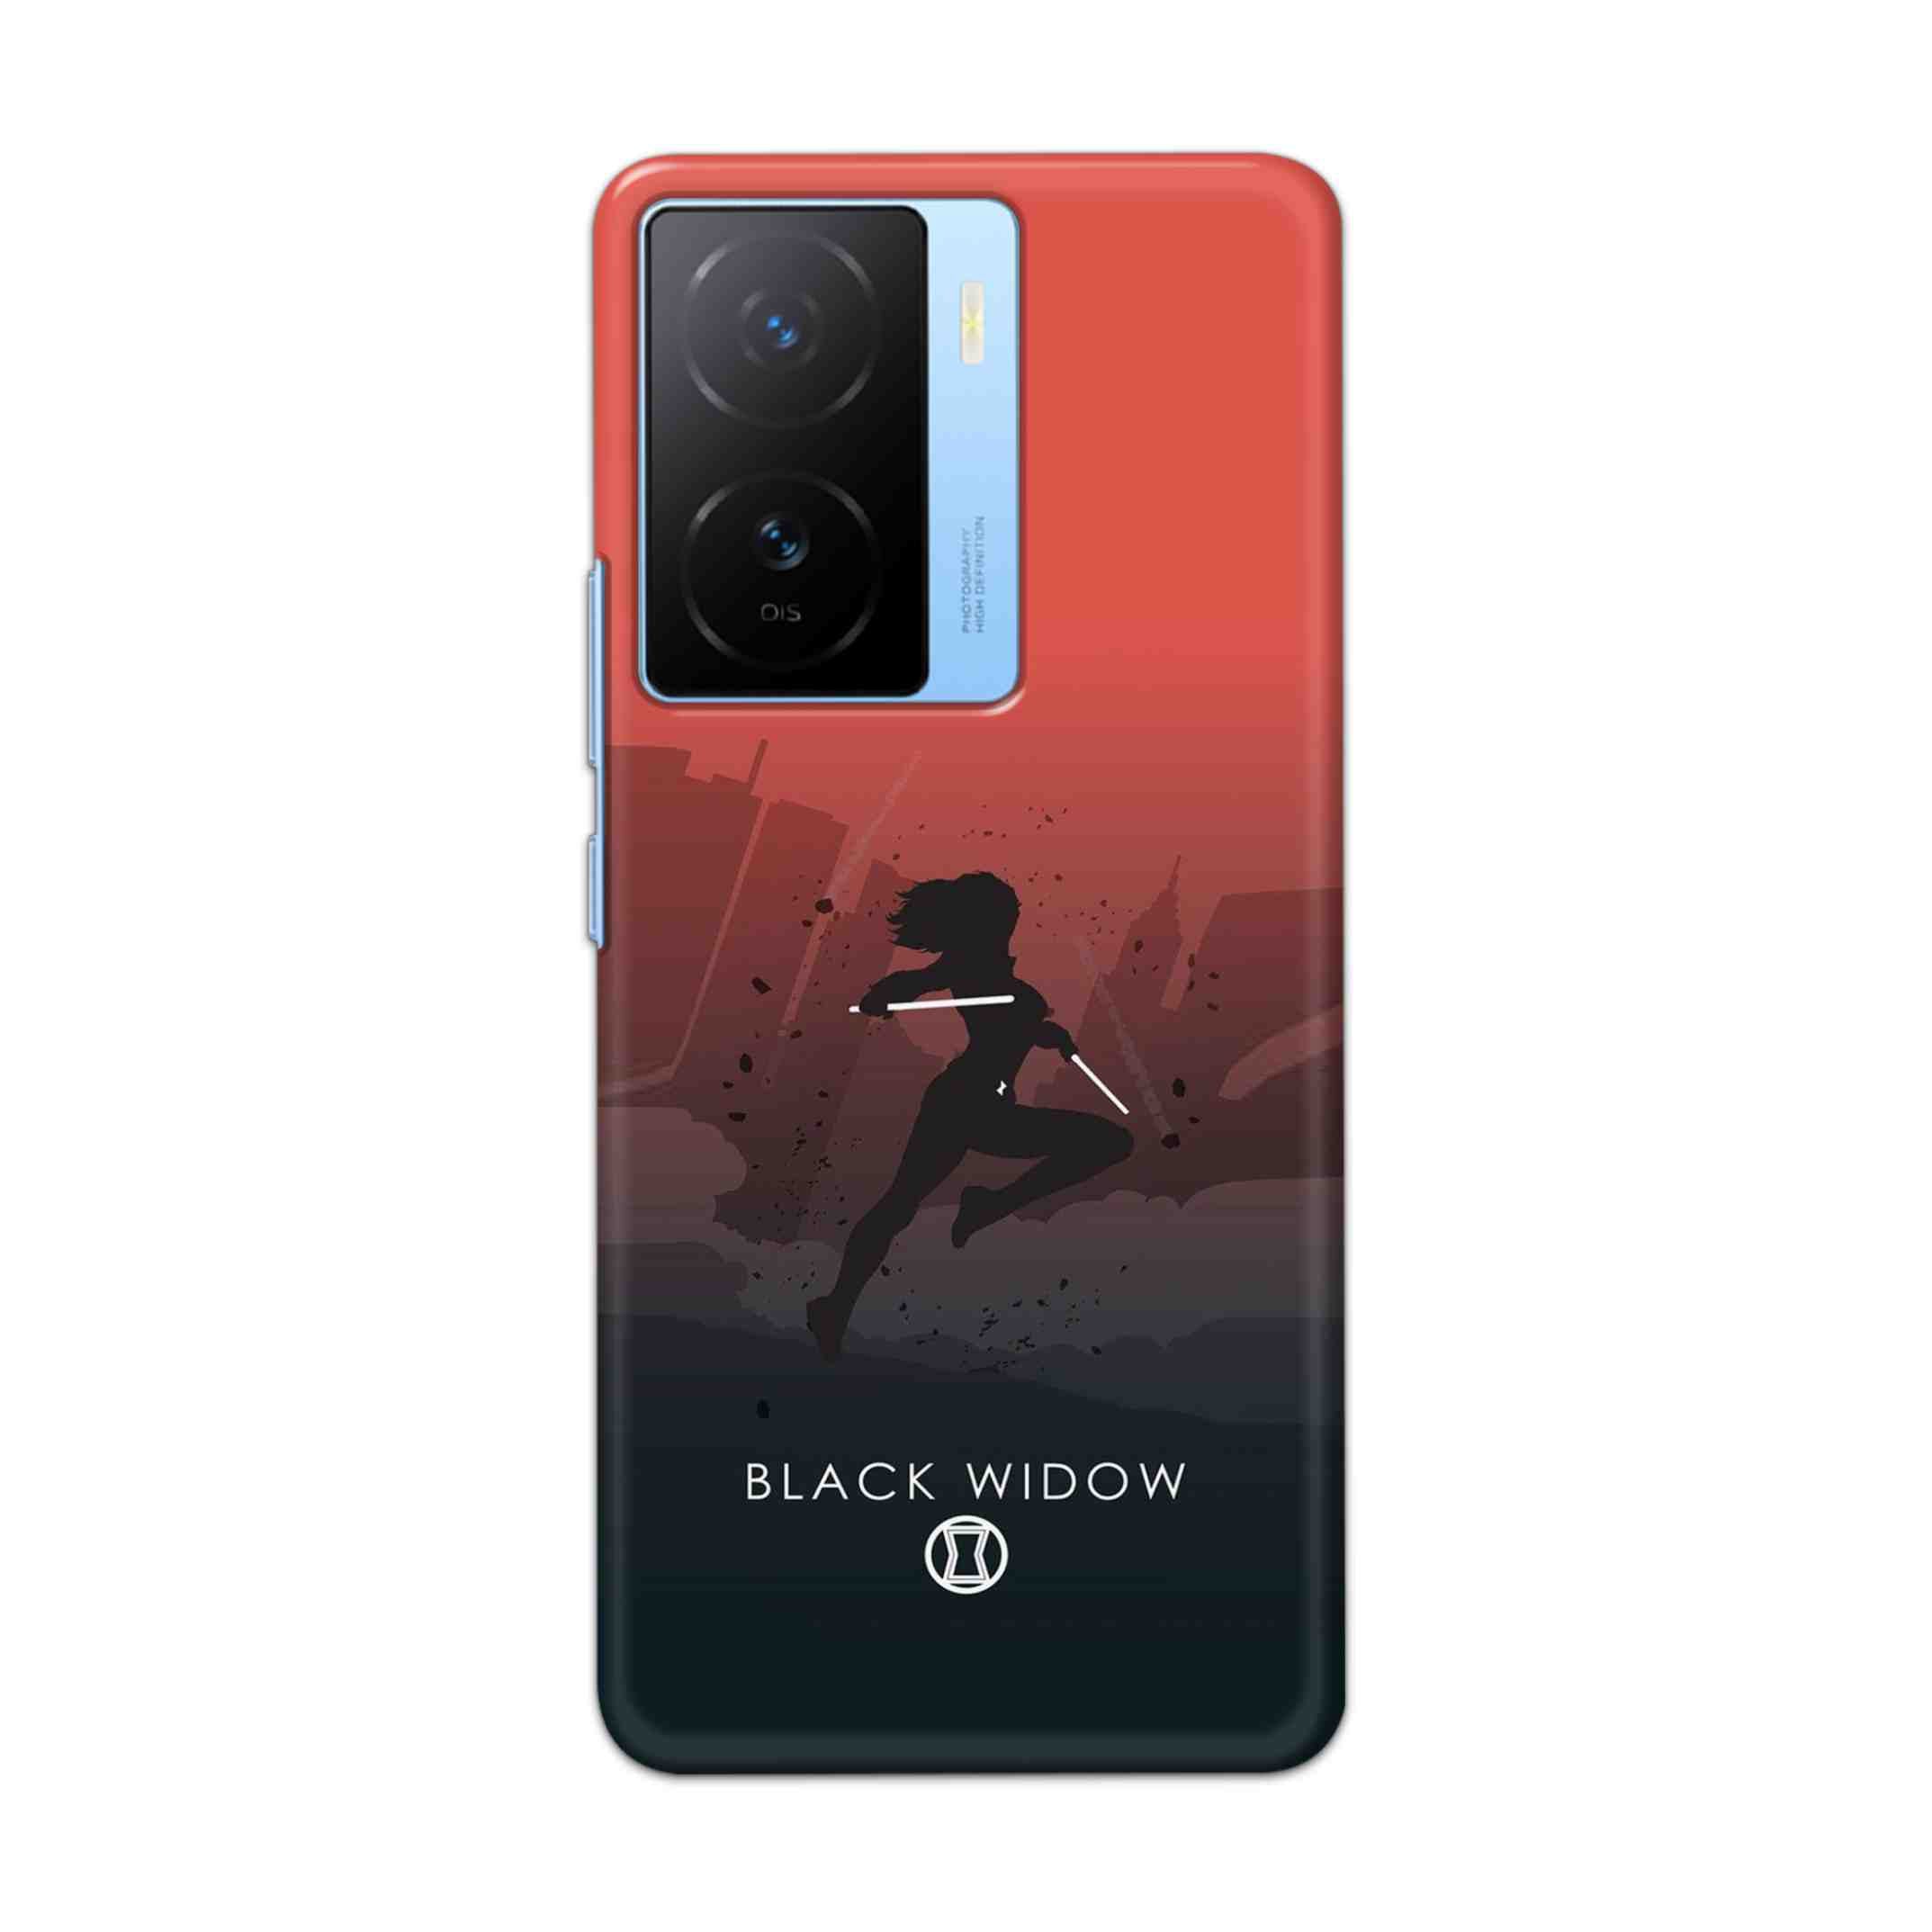 Buy Black Widow Hard Back Mobile Phone Case/Cover For iQOO Z7s Online